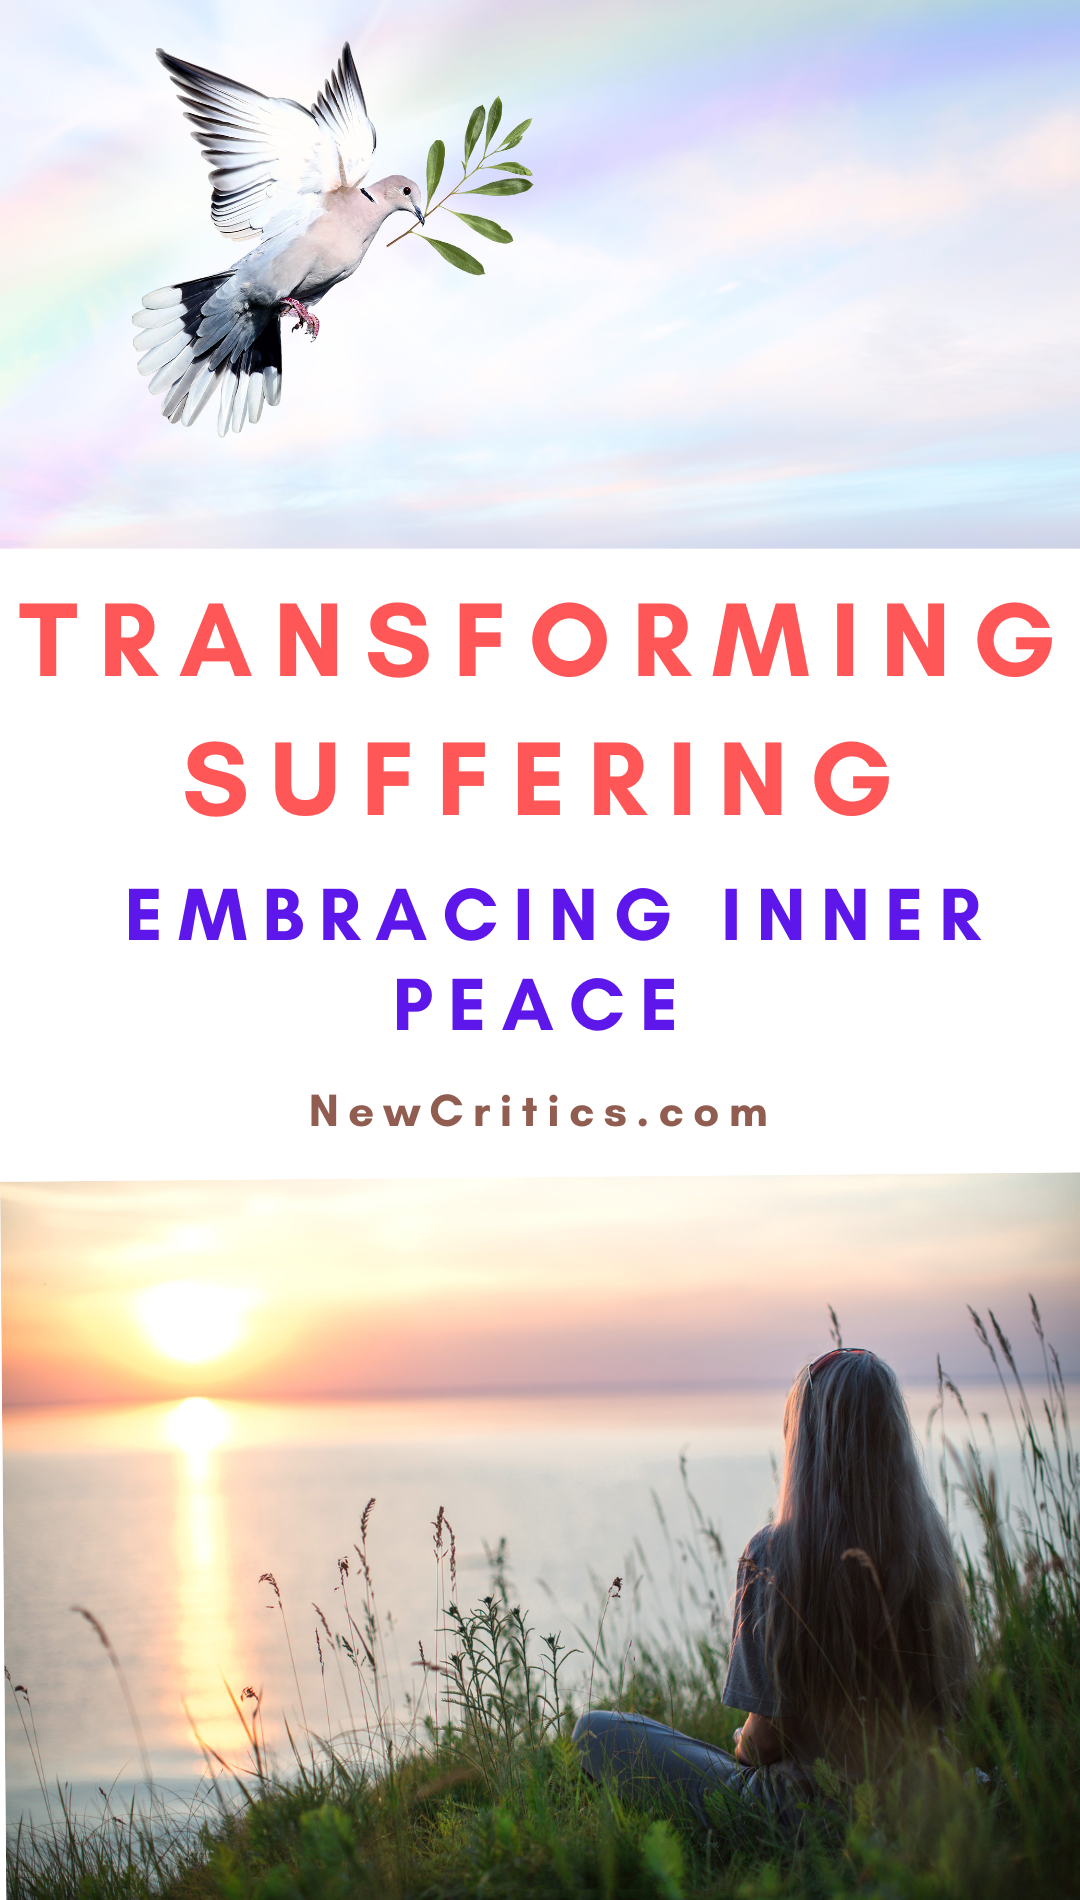 Embracing Reality And Inner Peace / Canva